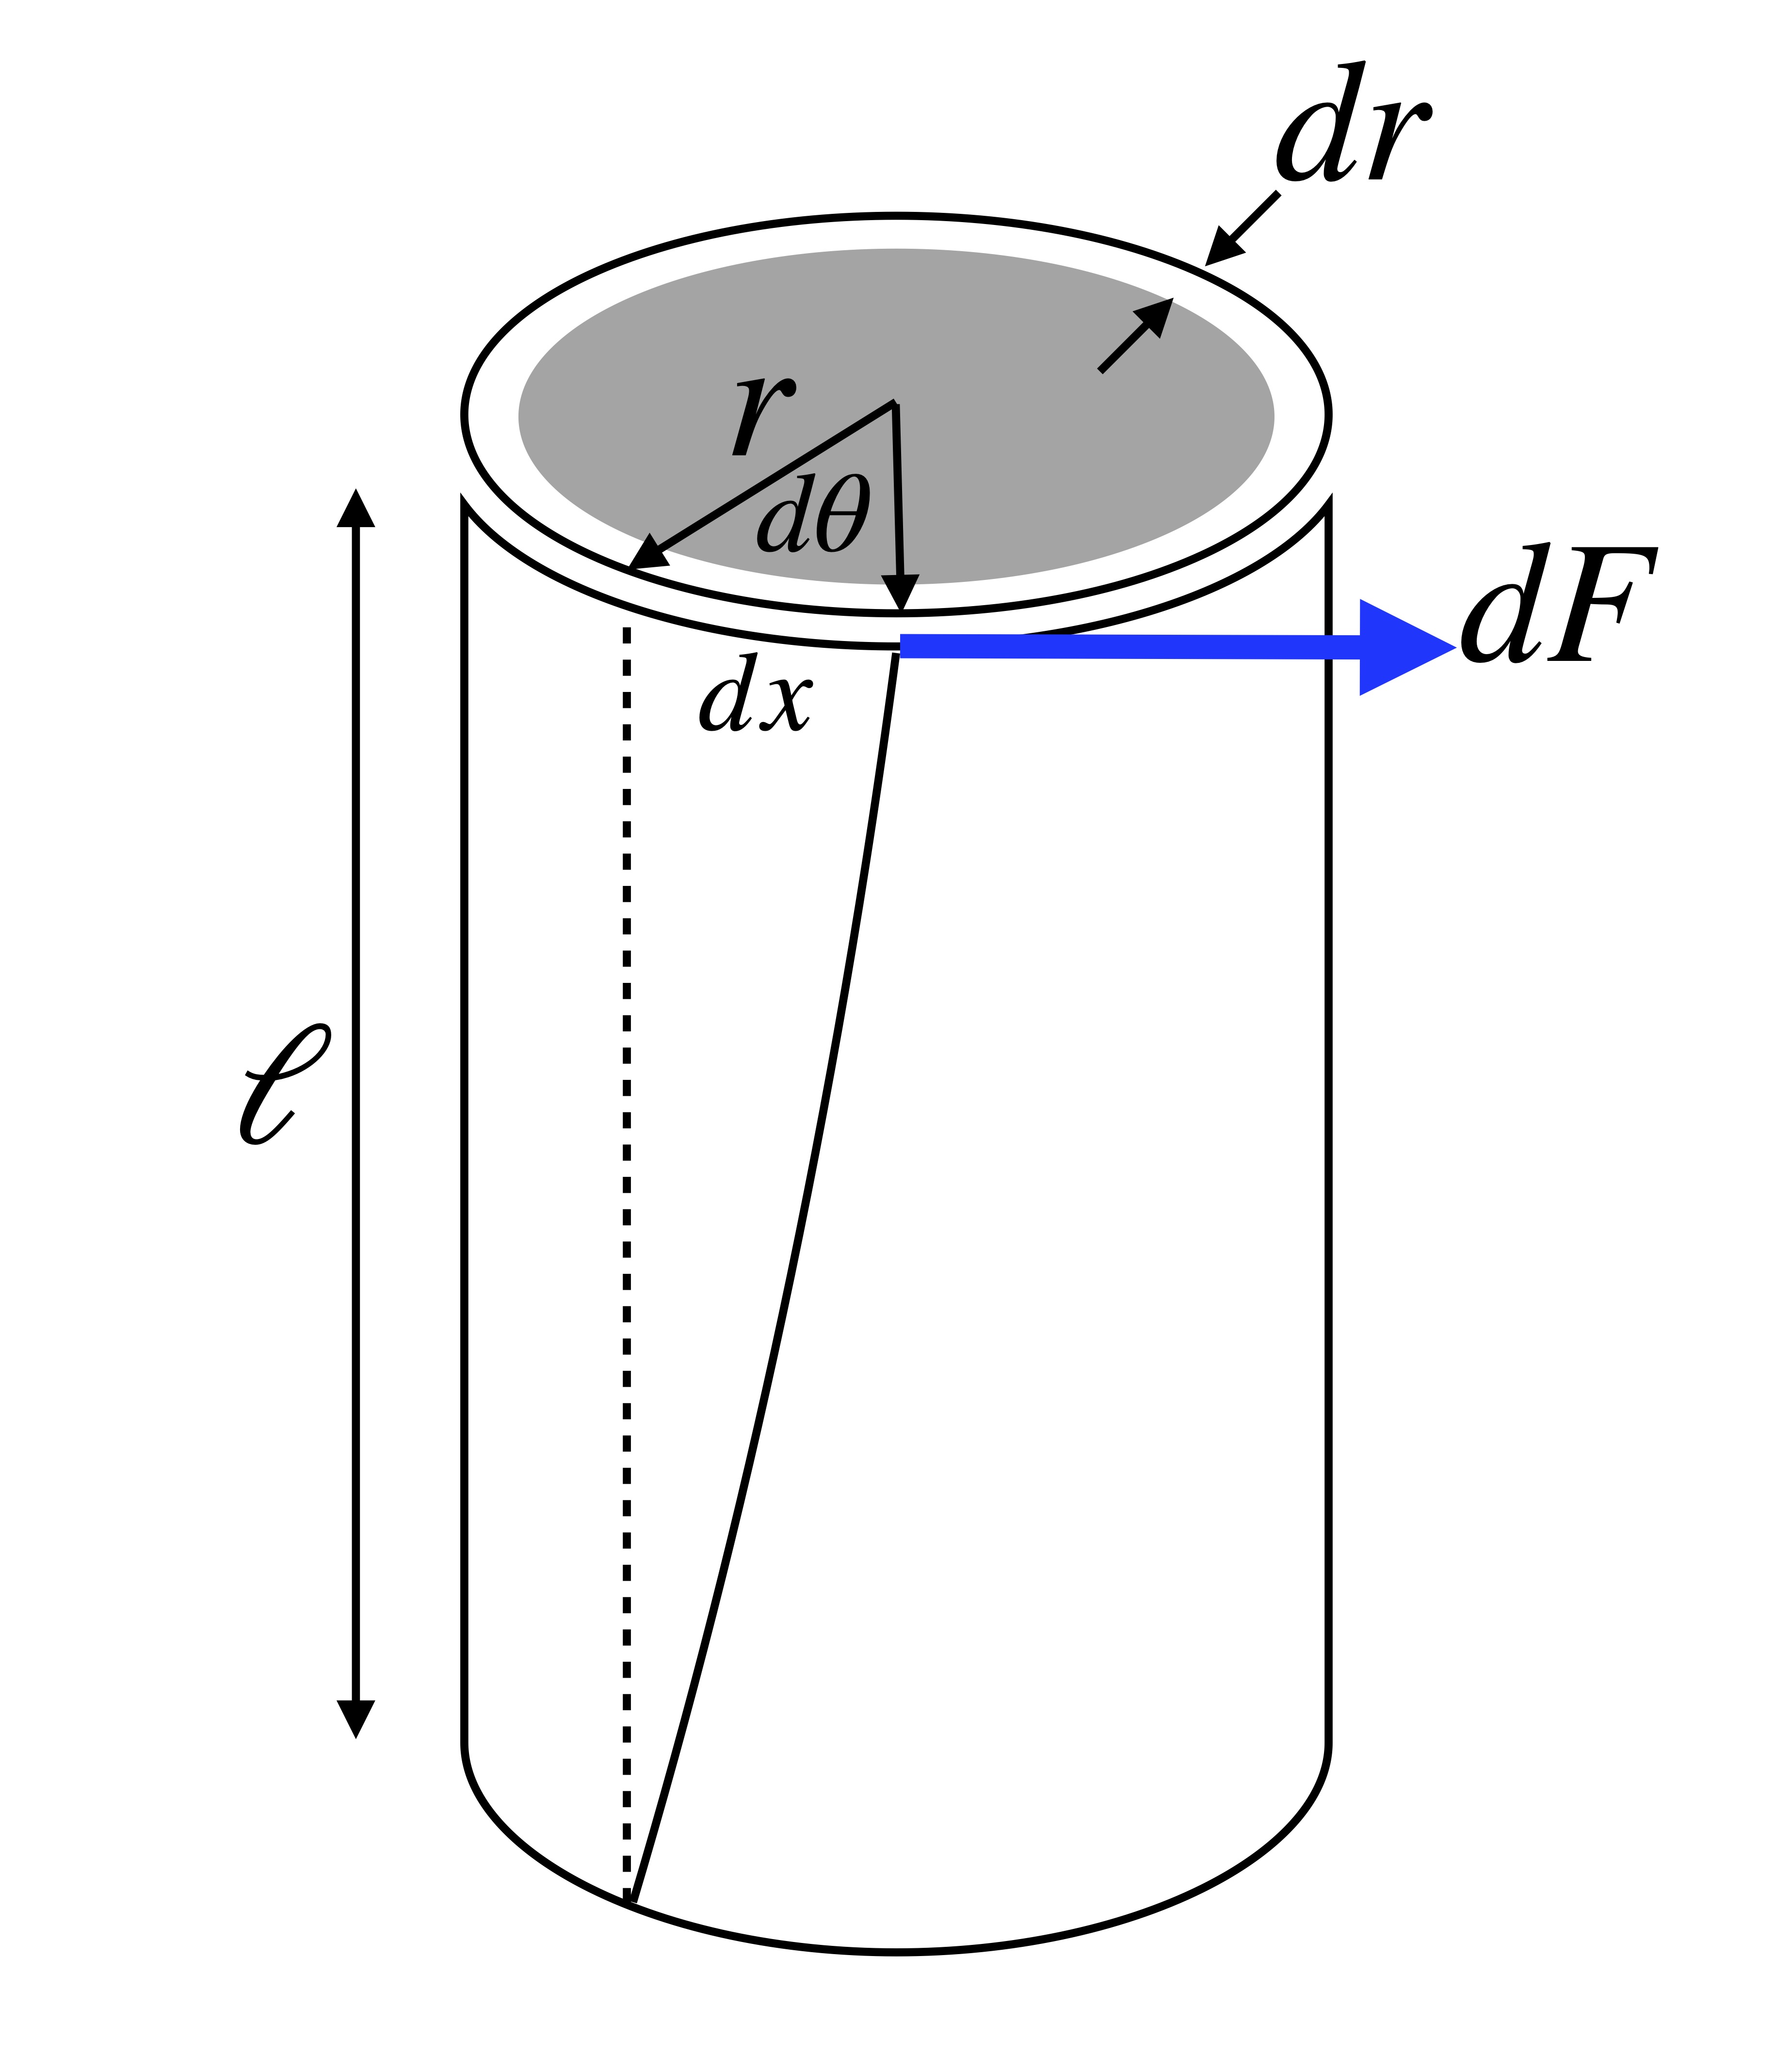 Twisted cylindrical element.